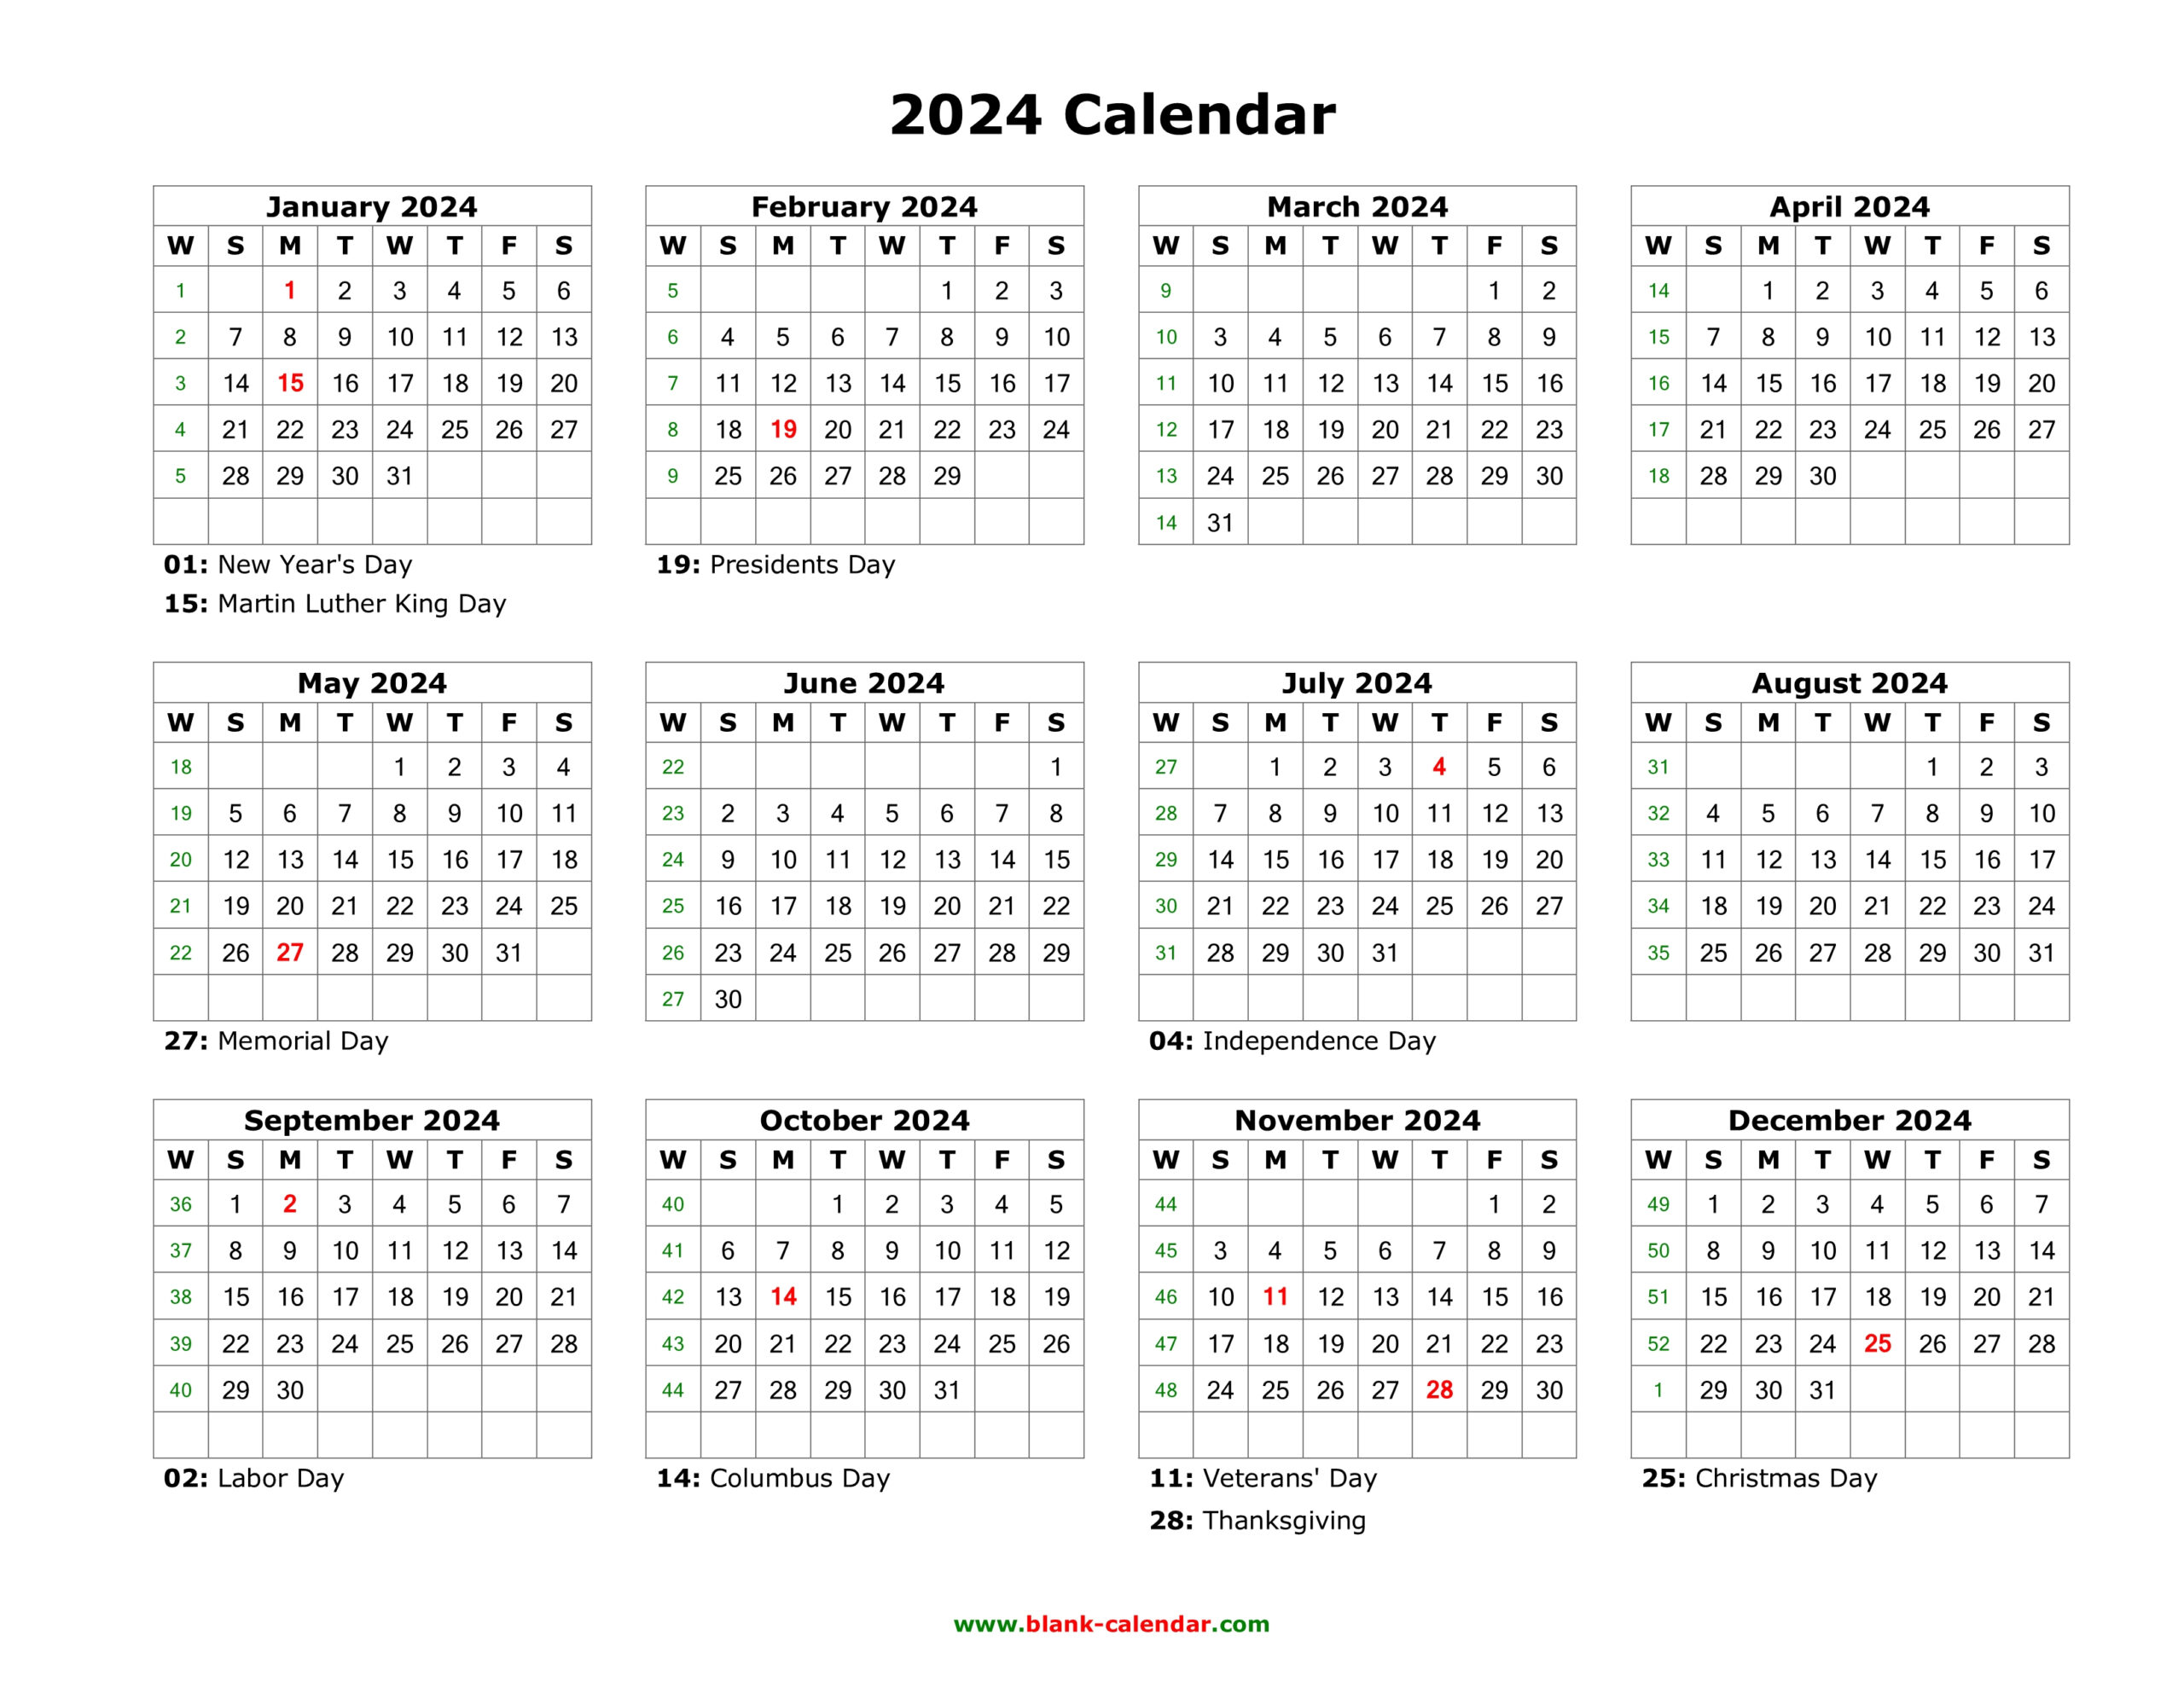 Download Blank Calendar 2024 With Us Holidays (12 Months On One for 2024 Printable Calendar With Holidays One Page